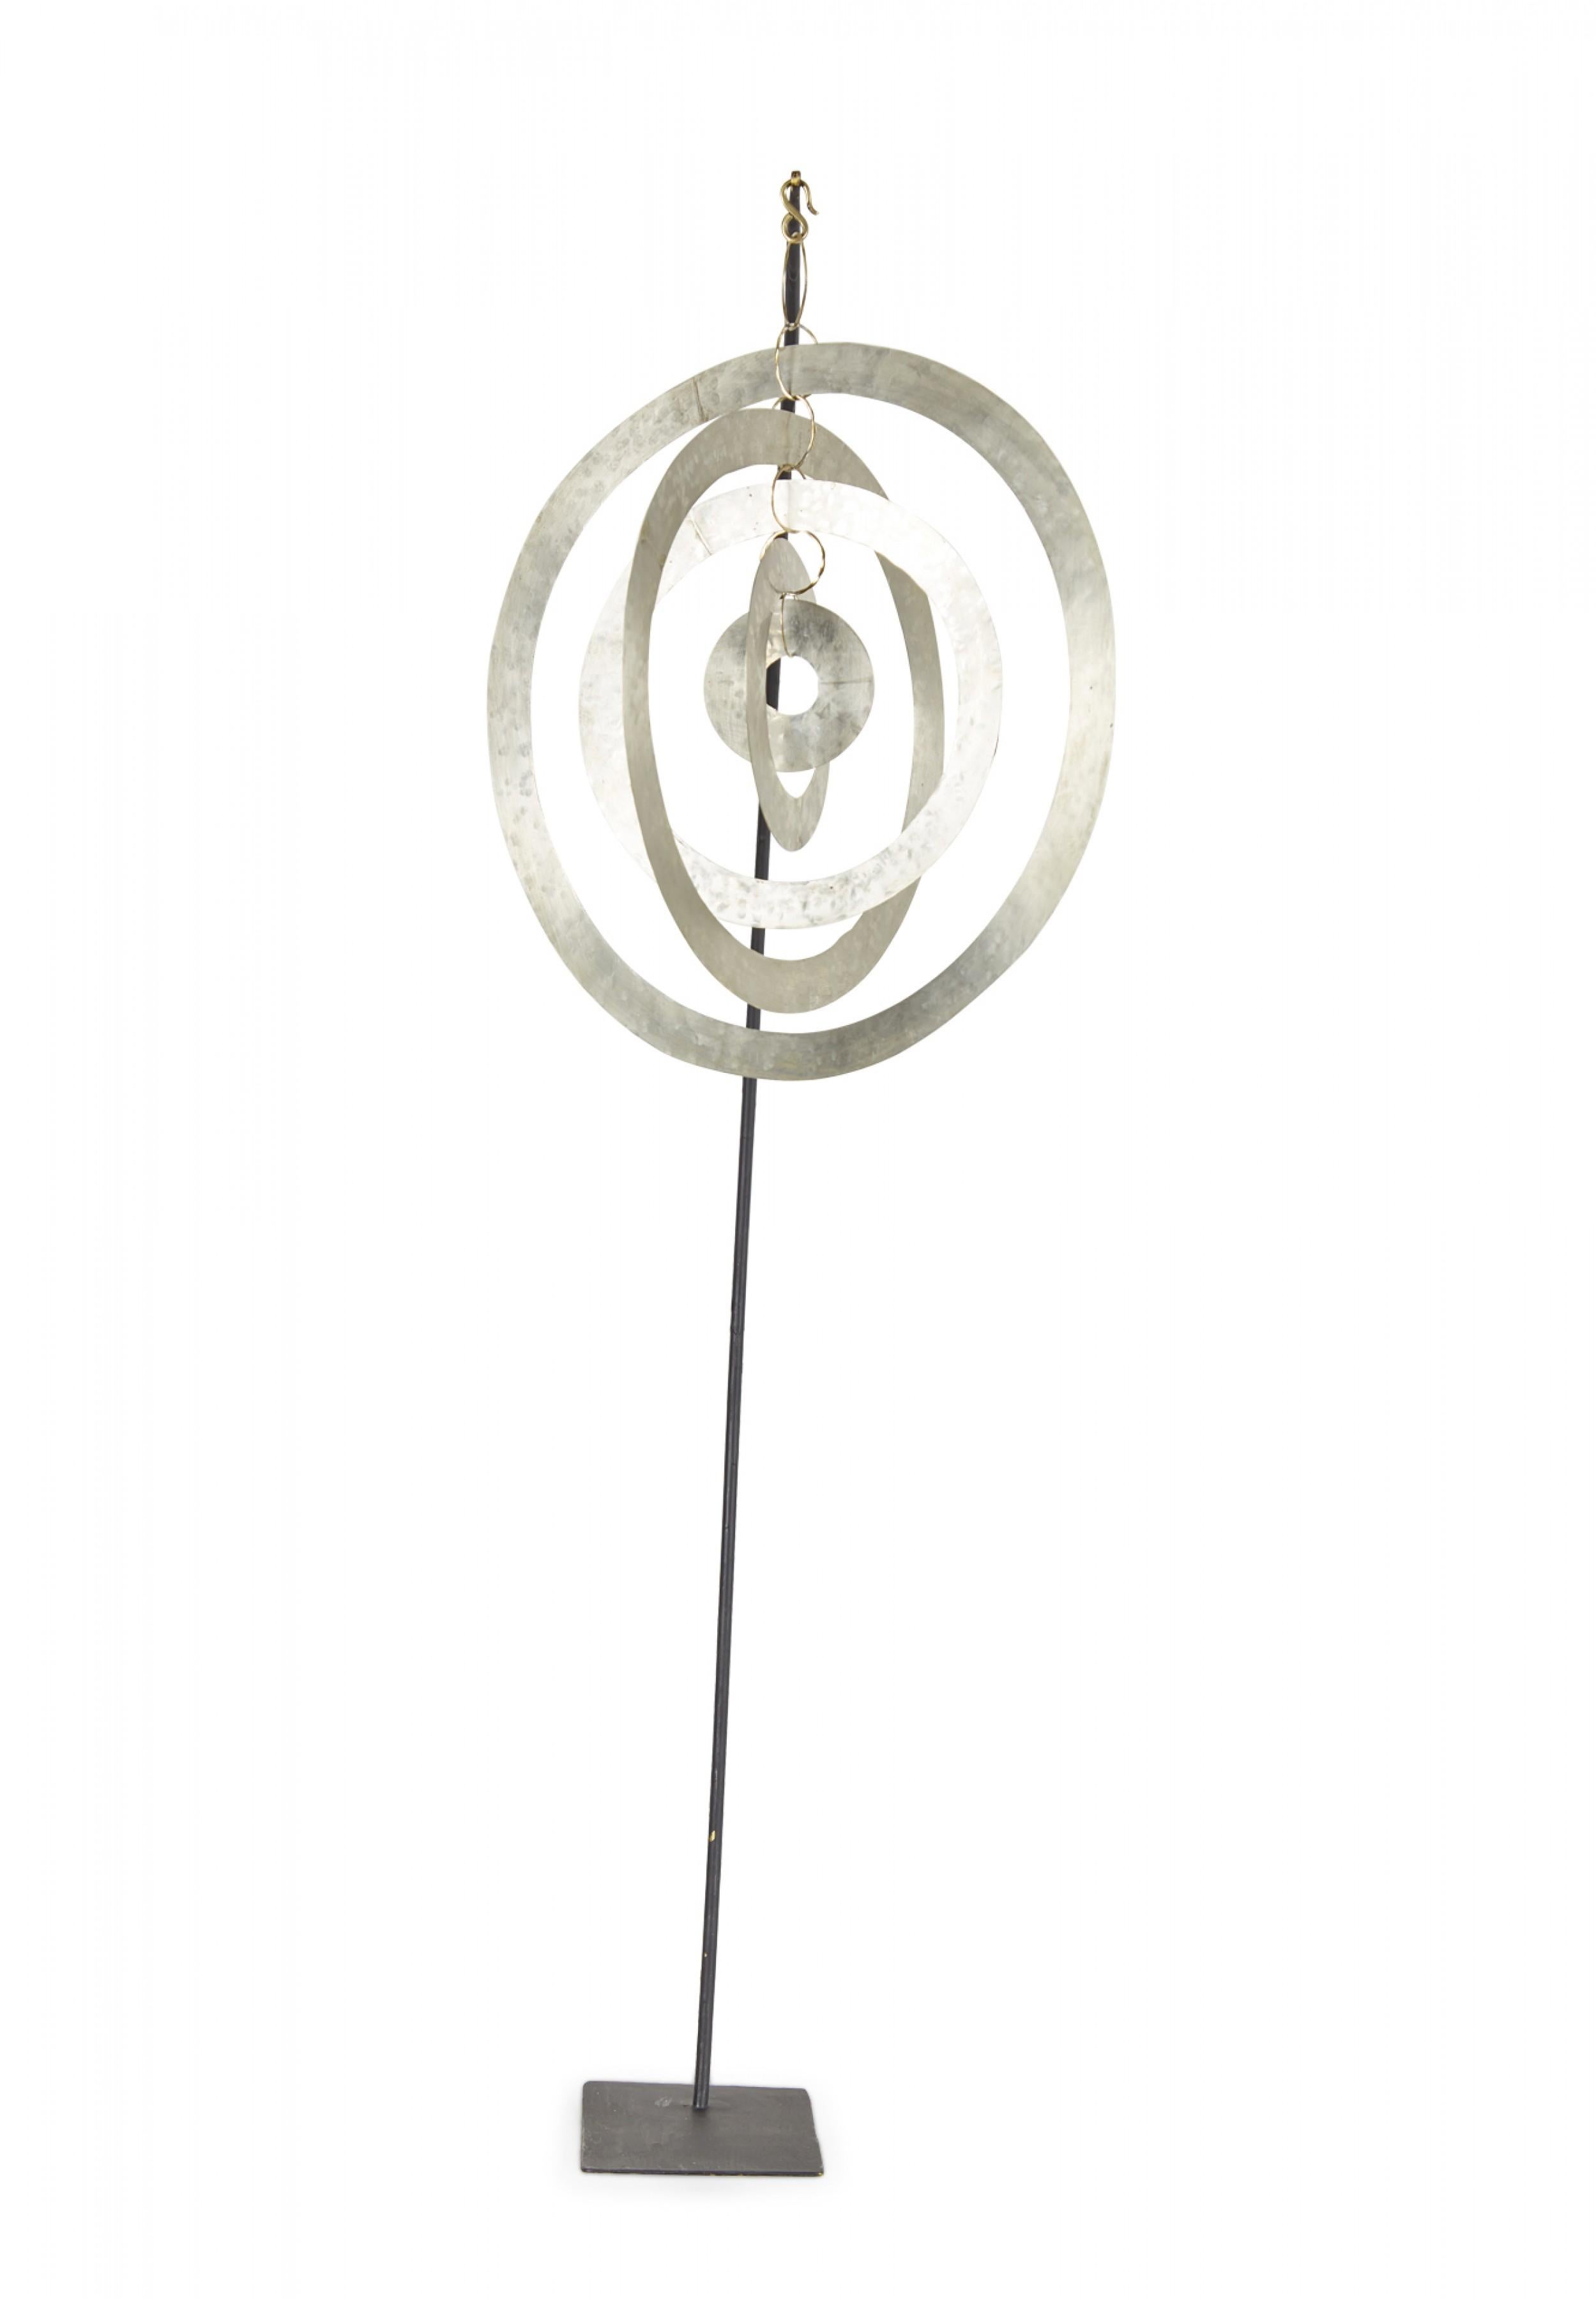 Contemporary sculpture /mobile featuring concentric hammered nickel circles and ovals suspended on a curved black metal stand titled, 